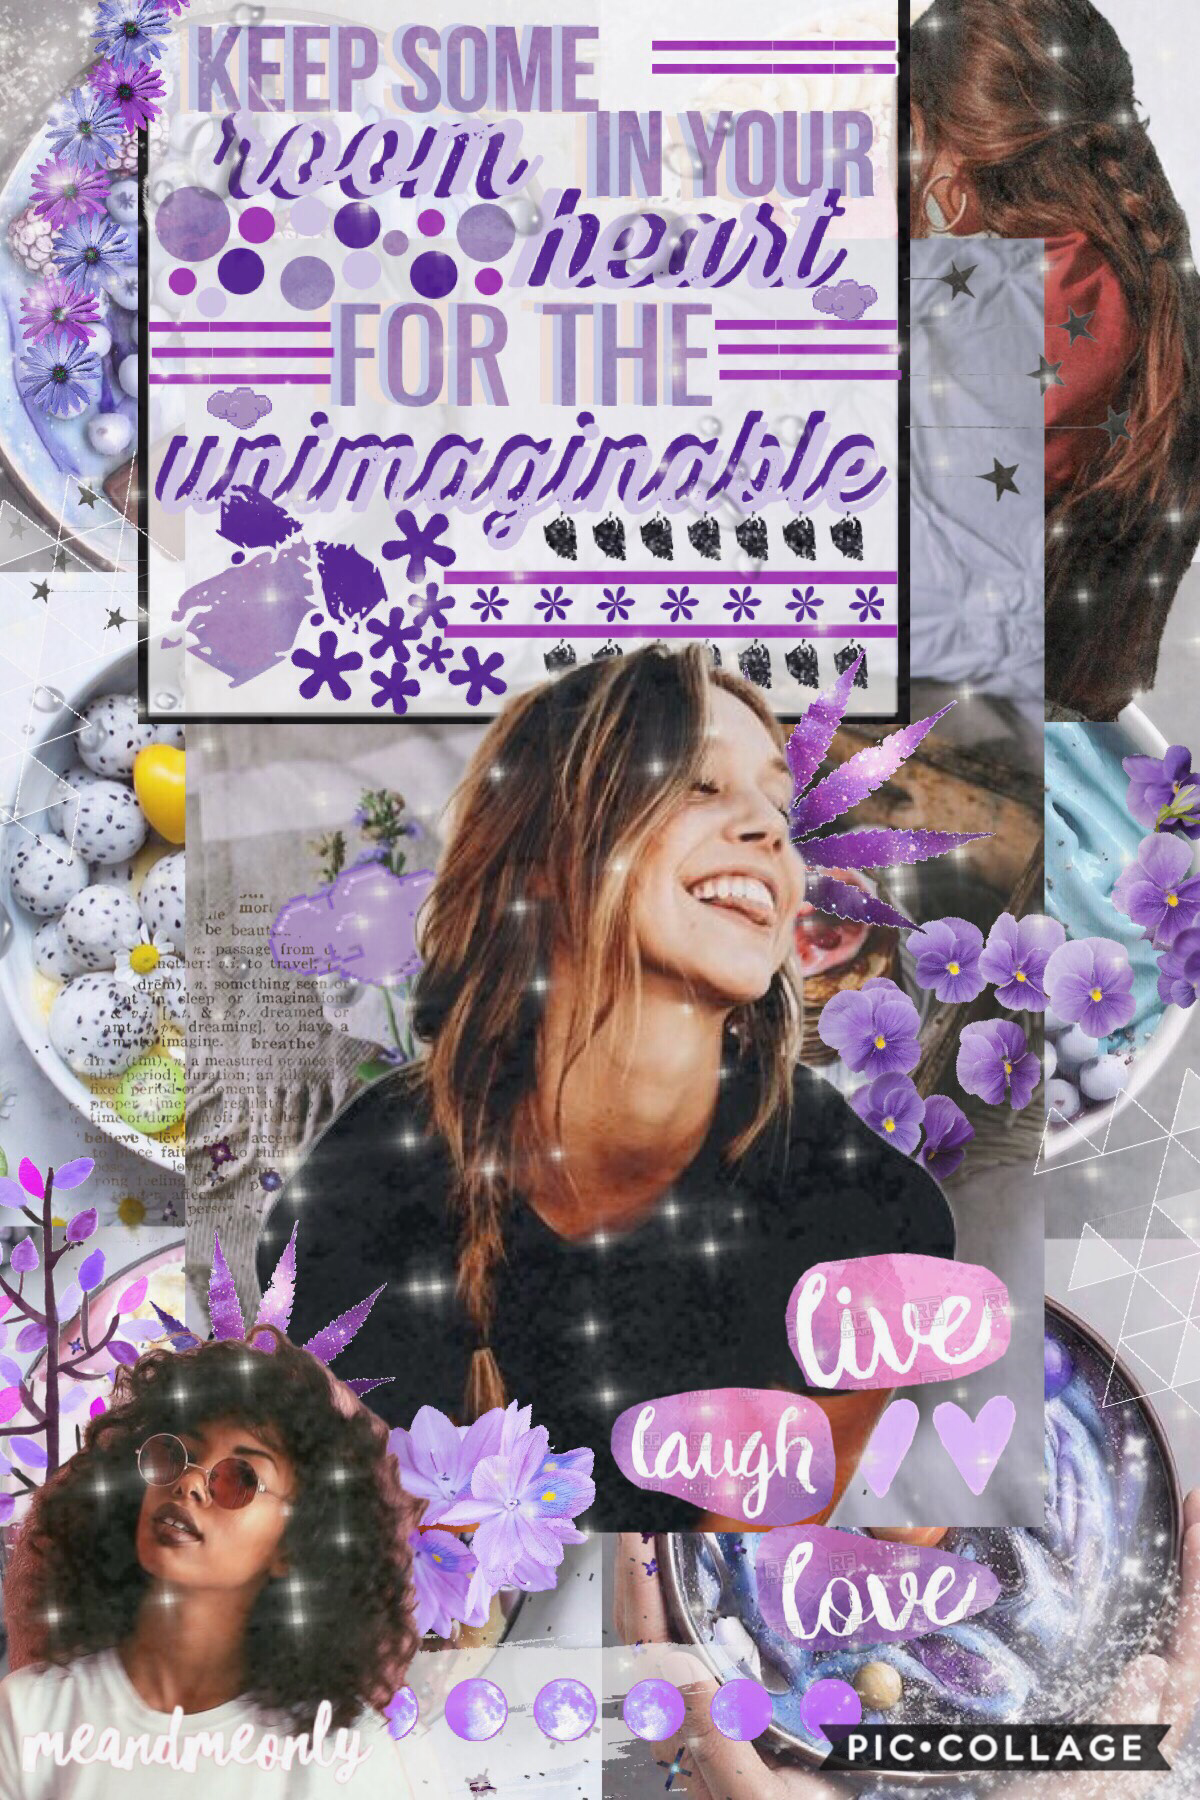 inspired by caribous💫 everyone go follow her she’s super amazing!! this was for a contest therefore the change in style of text! 🌸 how’s everyone? remember stay strong and believe in yourself💘QOTD: fav day? QOTD: friday🤩